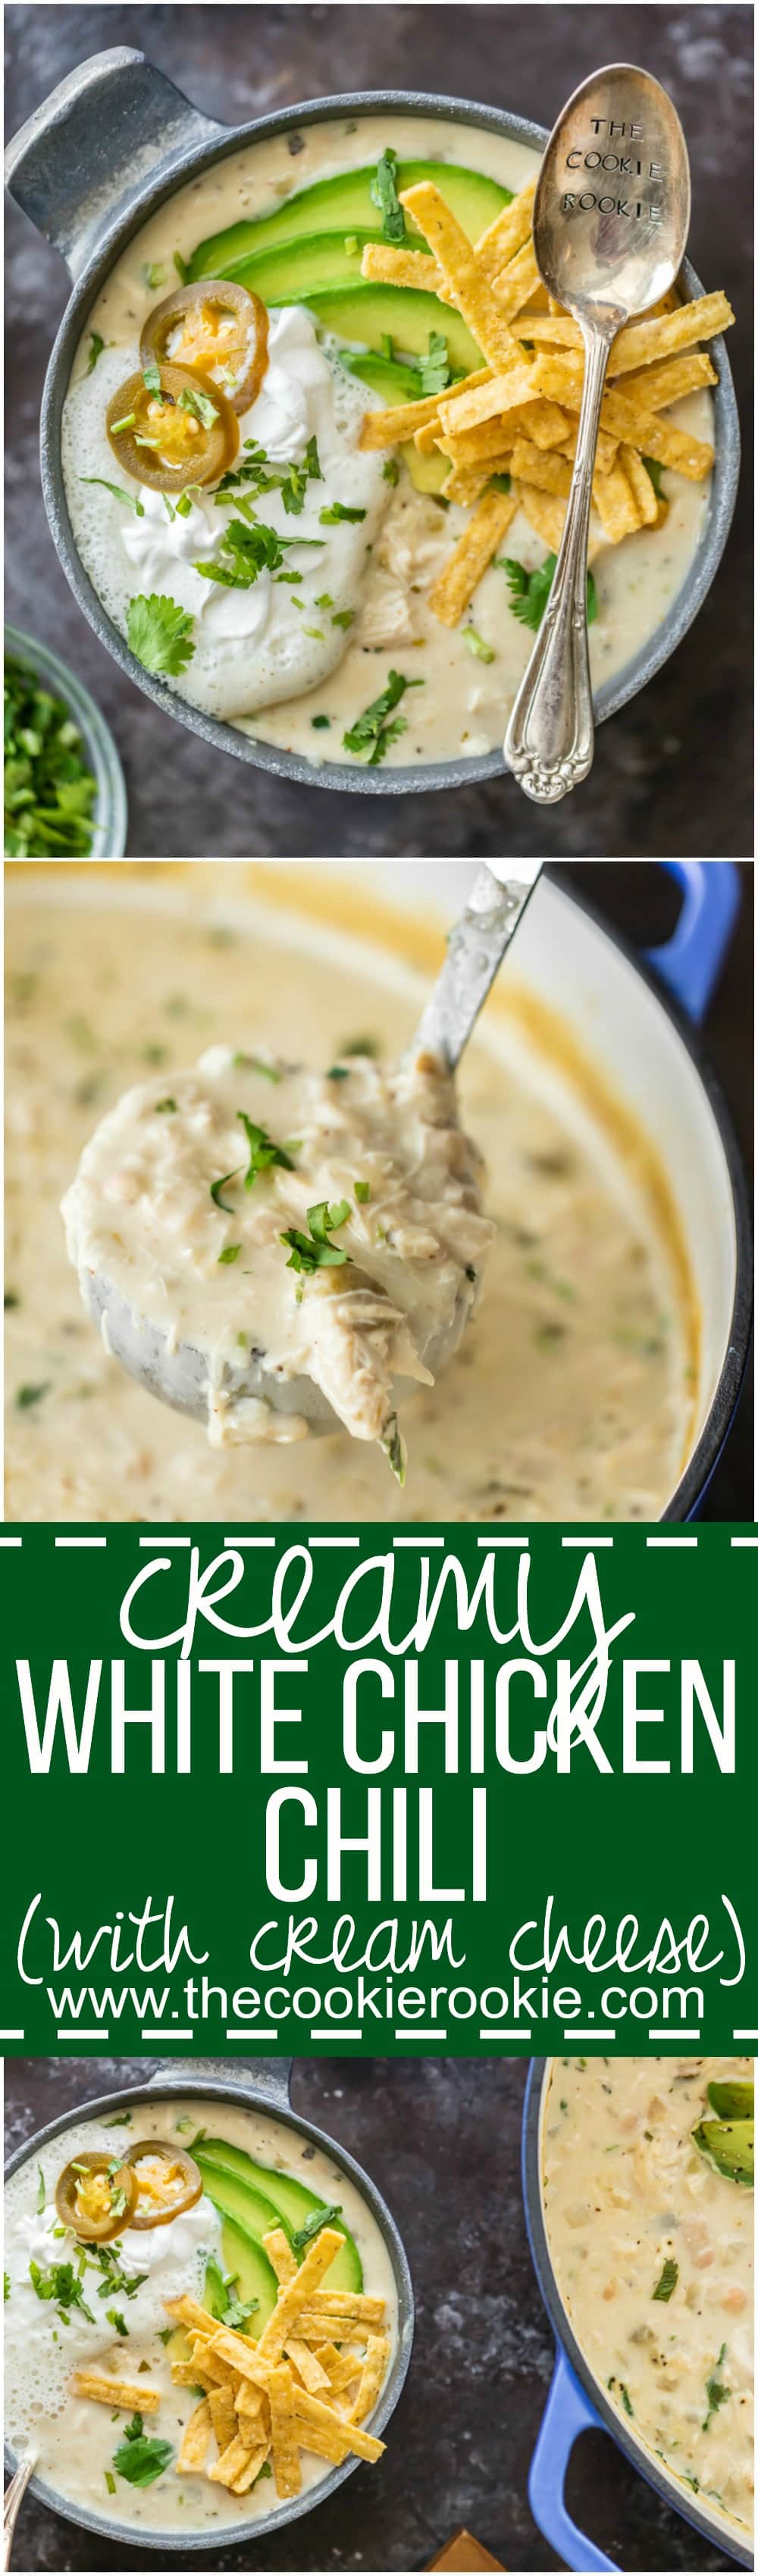 Creamy White Chicken Chili with Cream Cheese - The Cookie Rookie